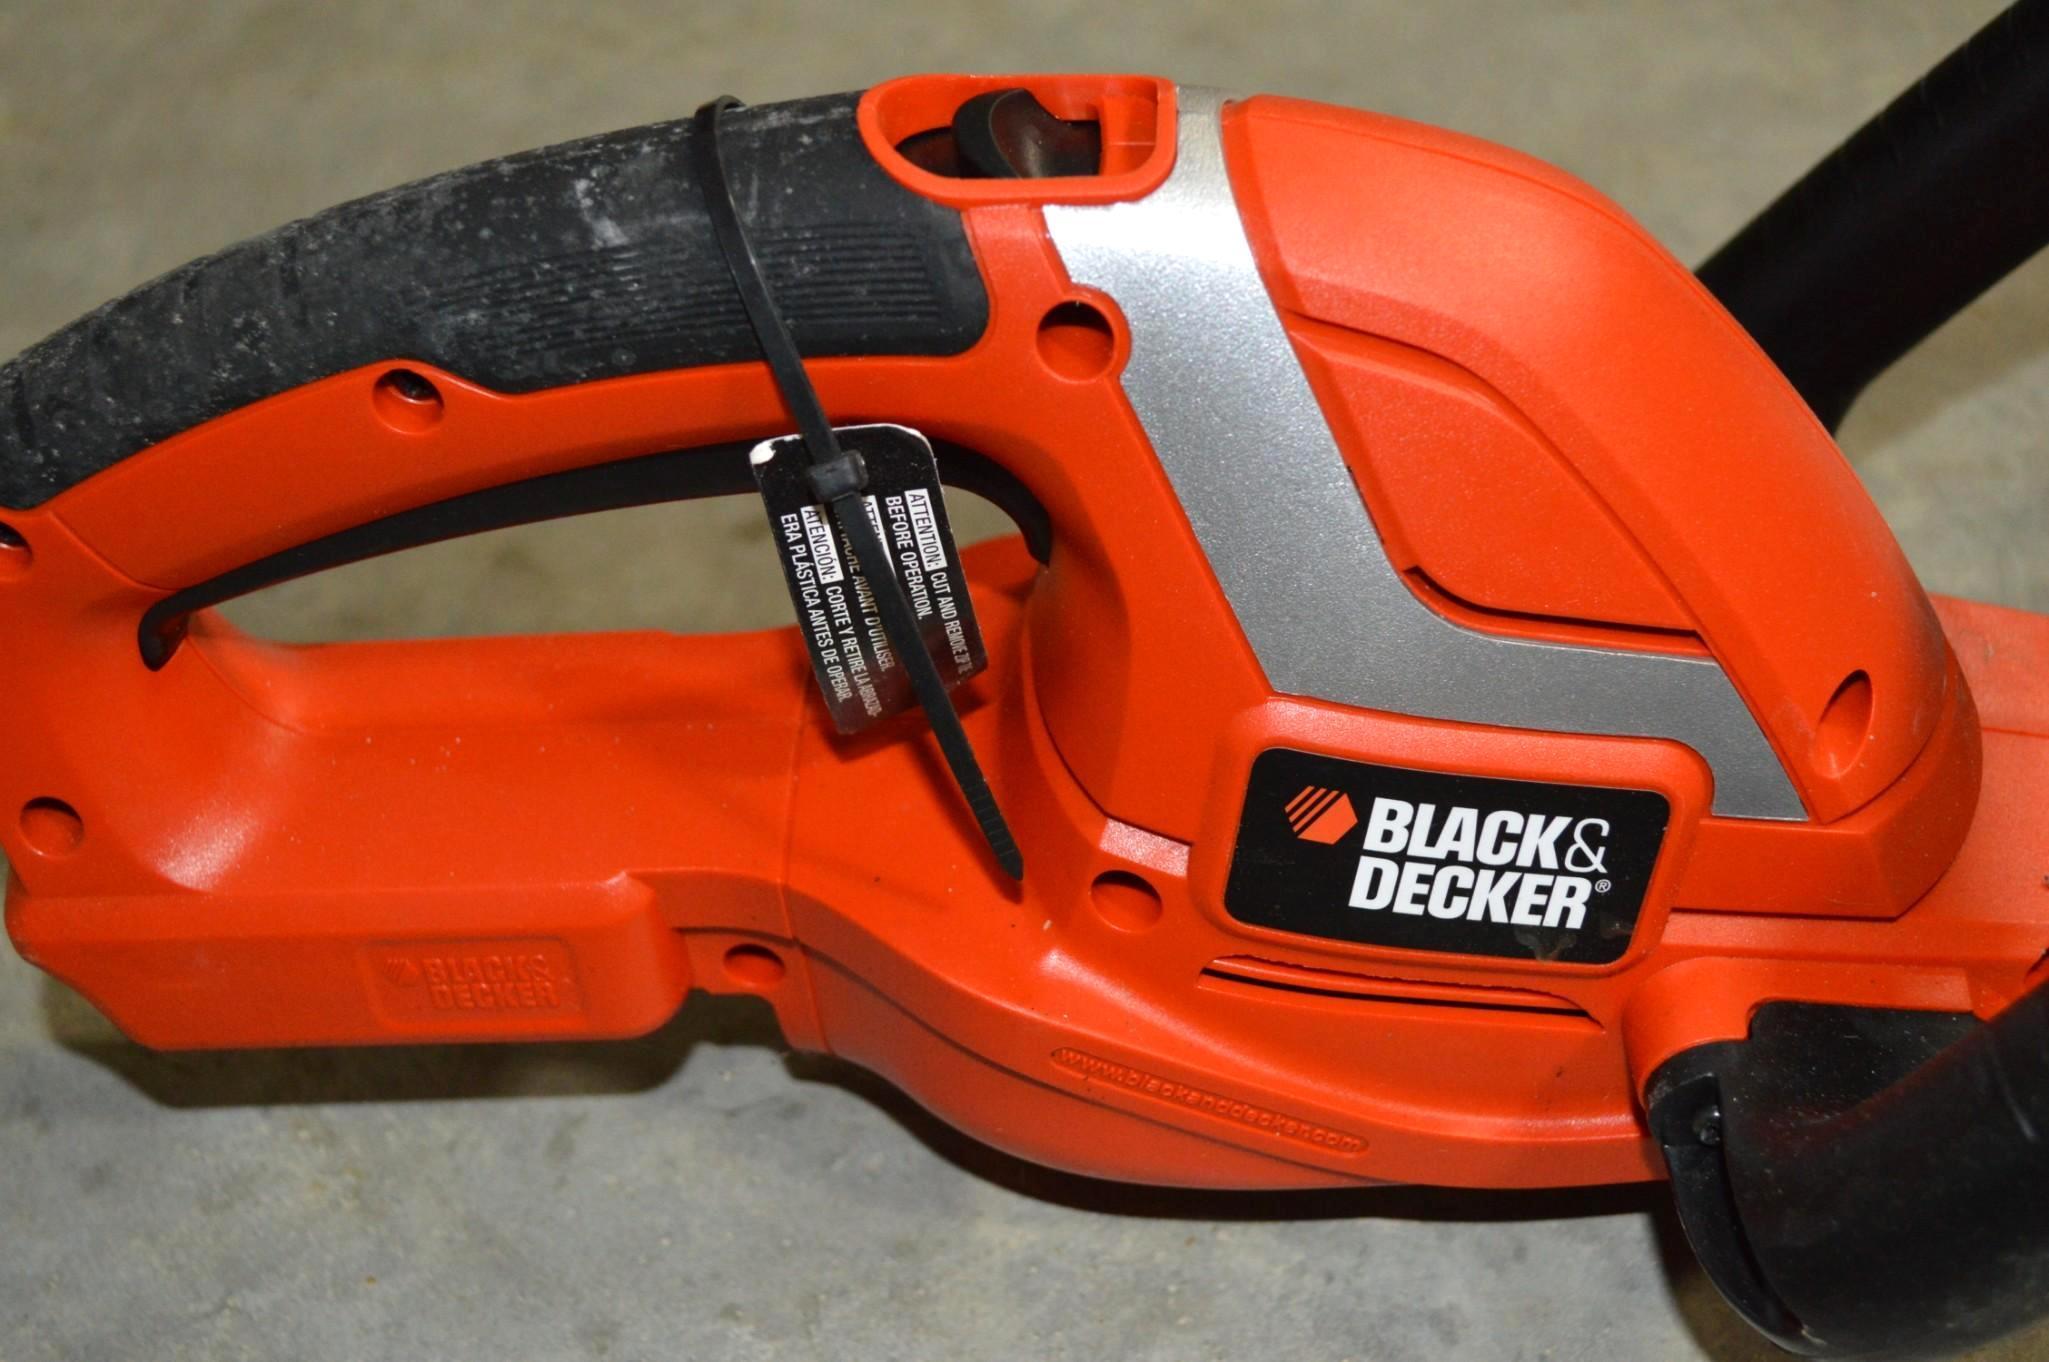 Black & Decker Electric Hedge Trimmer and Rayovac Safety Light